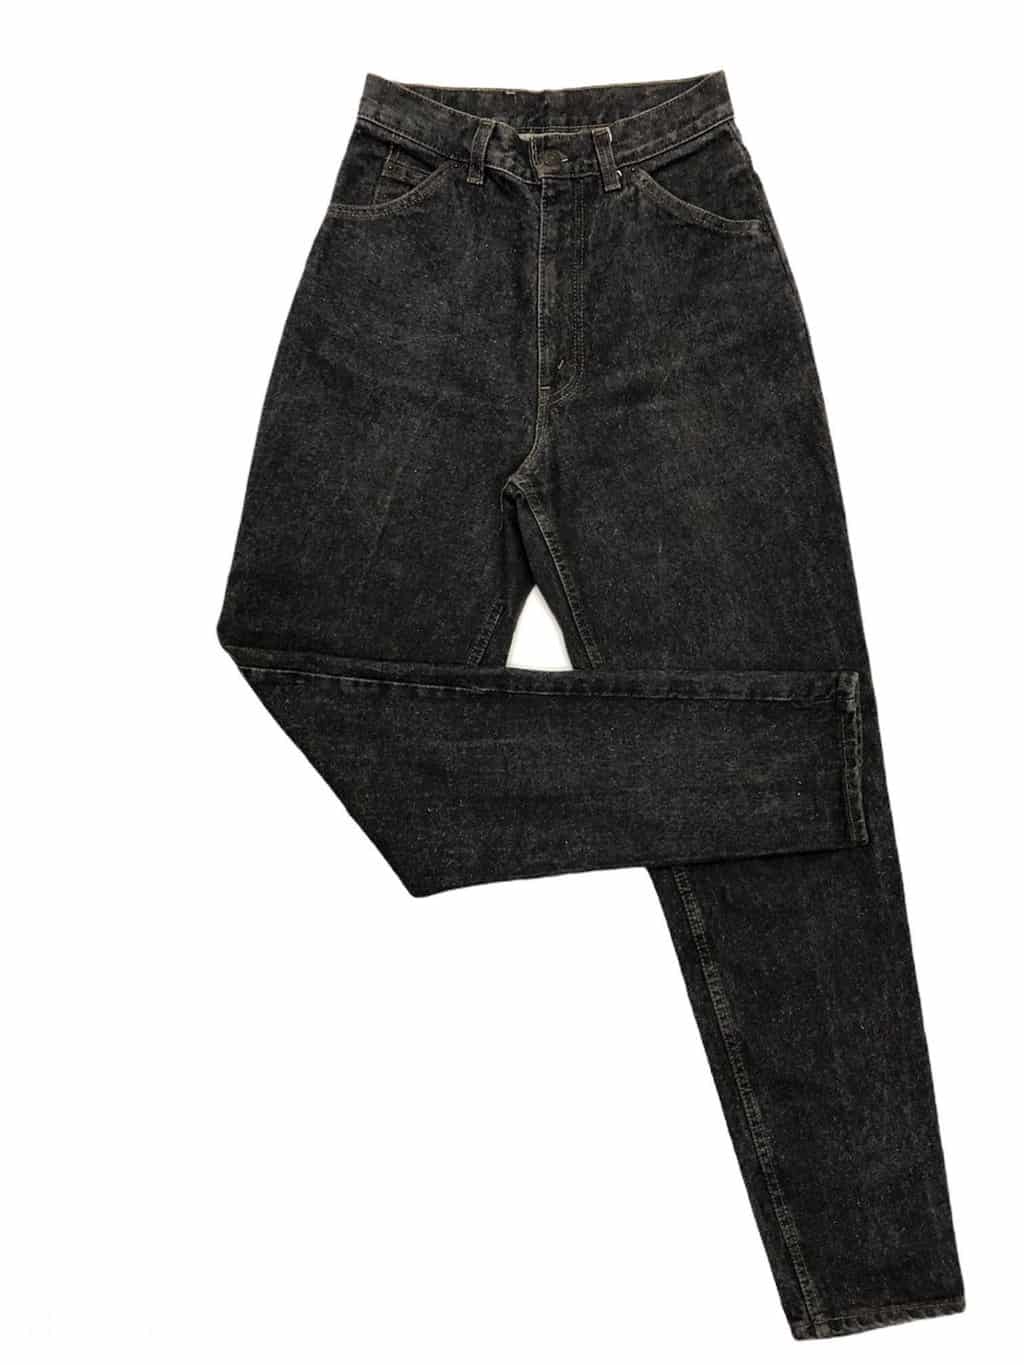 Vintage 1980s womens rare 961 Levis high rise jeans in charcoal grey with  silver tab - W26 x L32 - St Cyr Vintage